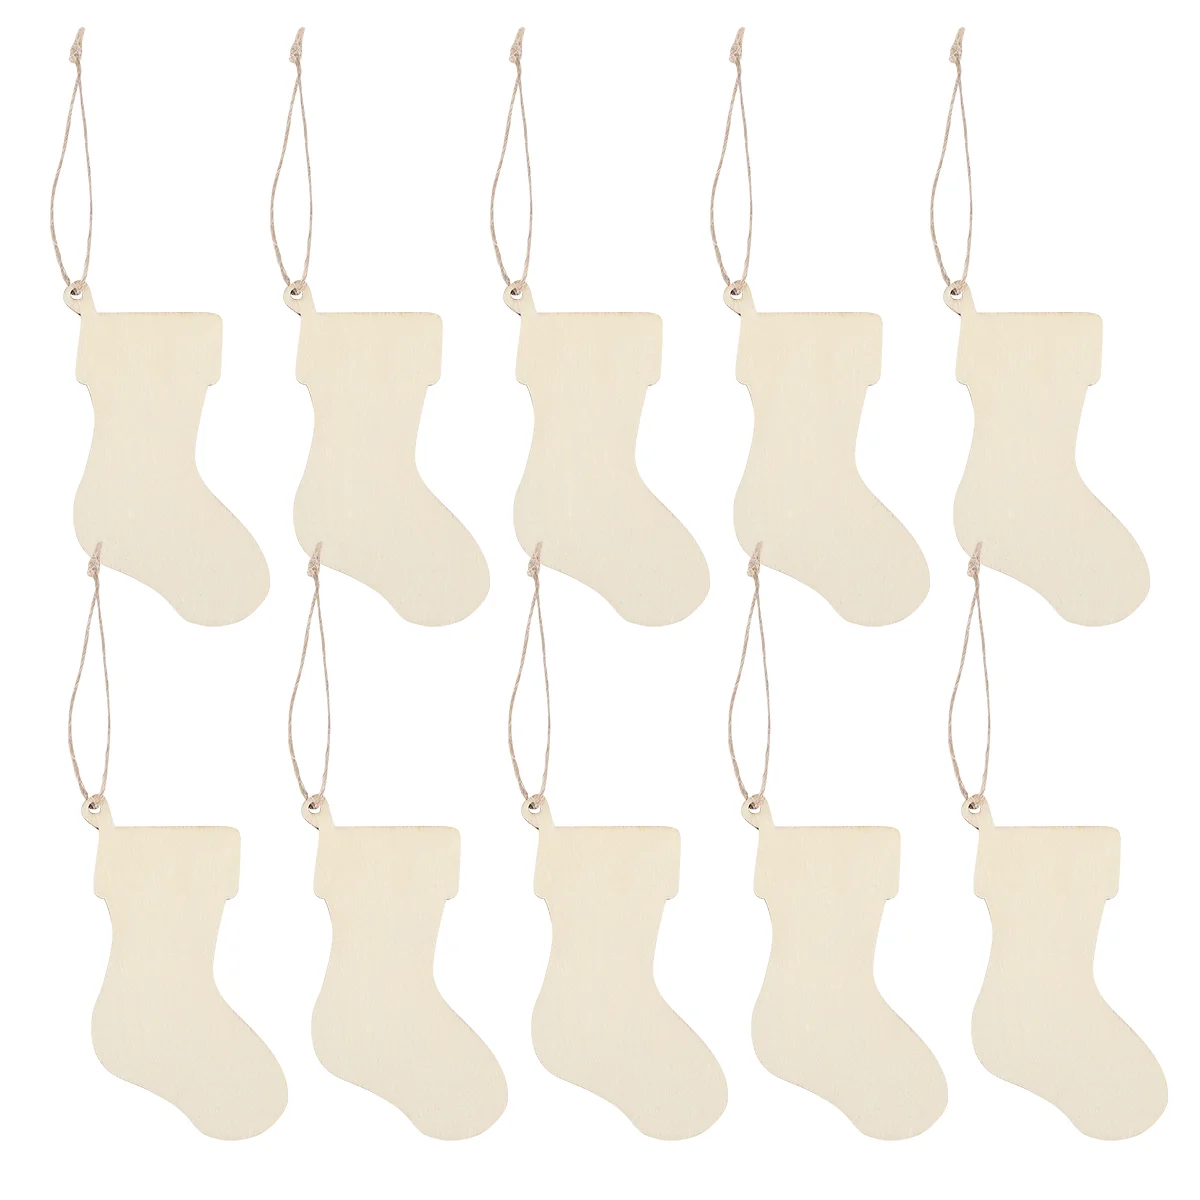 

Christmas Unfinished Stocking Cutouts Blank Wooden Slices To Paint Socks Pendant Ropes Crafts